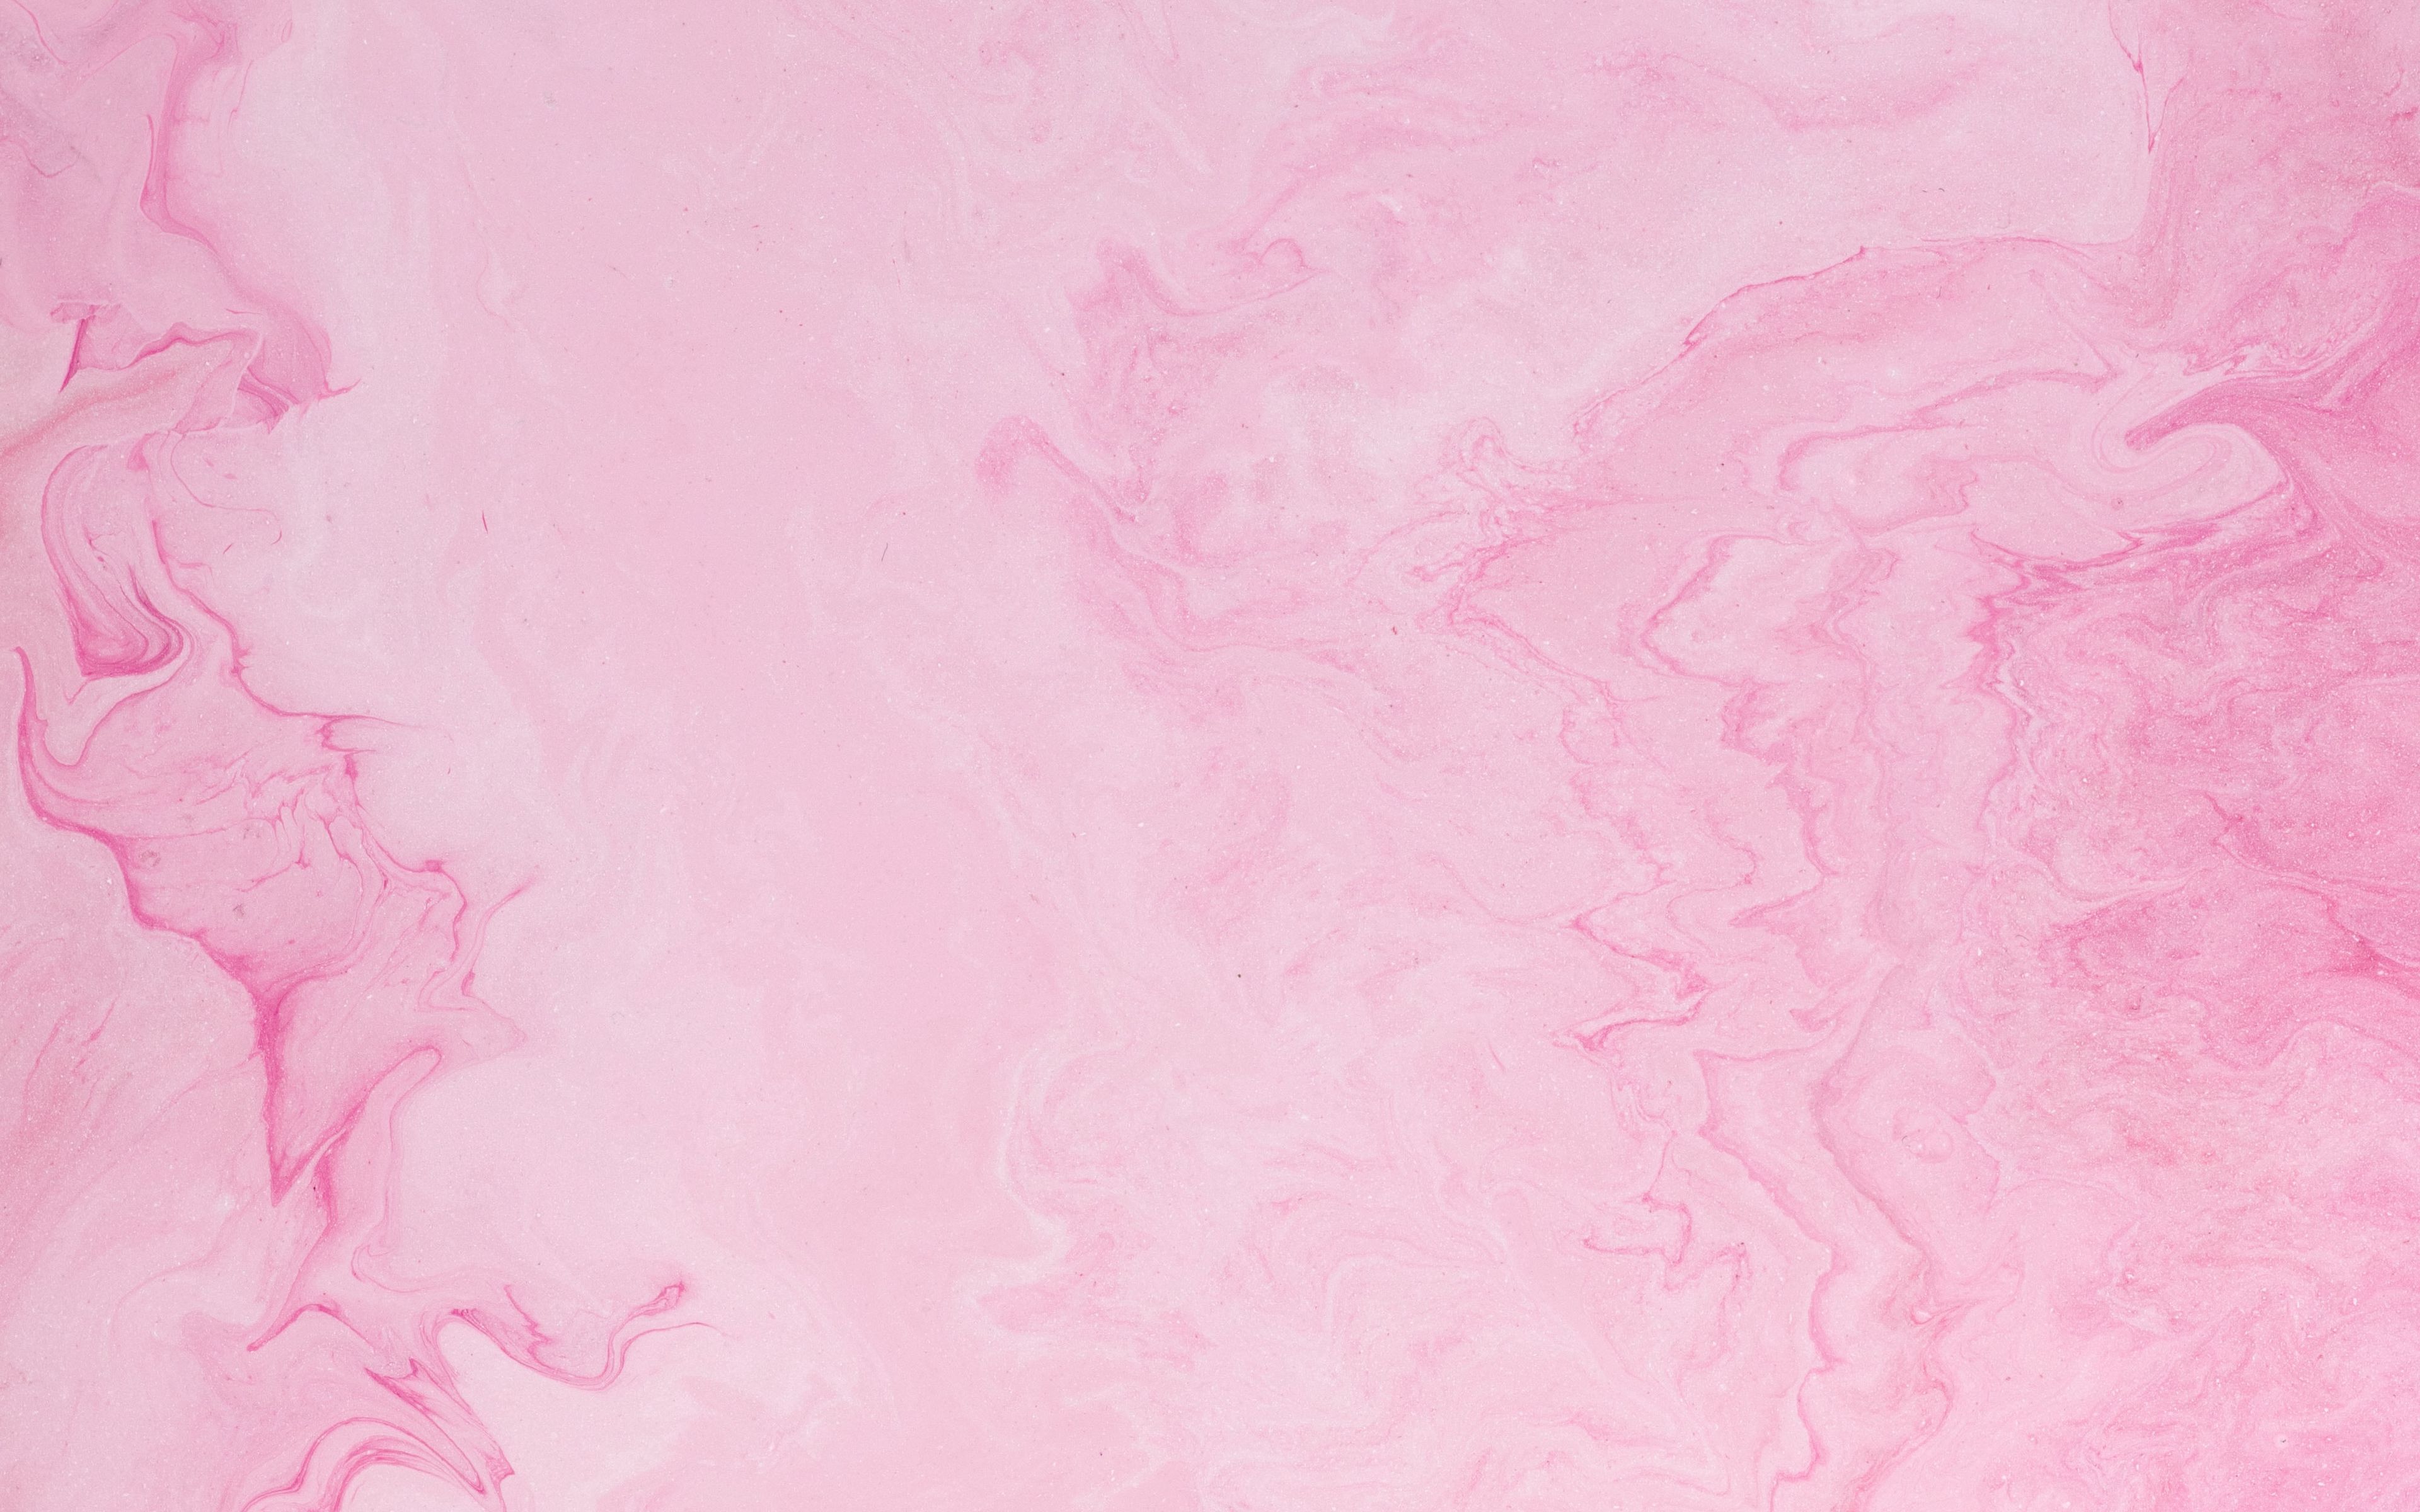 Download wallpaper 3840x2400 stains, texture, liquid, pink, abstraction ...